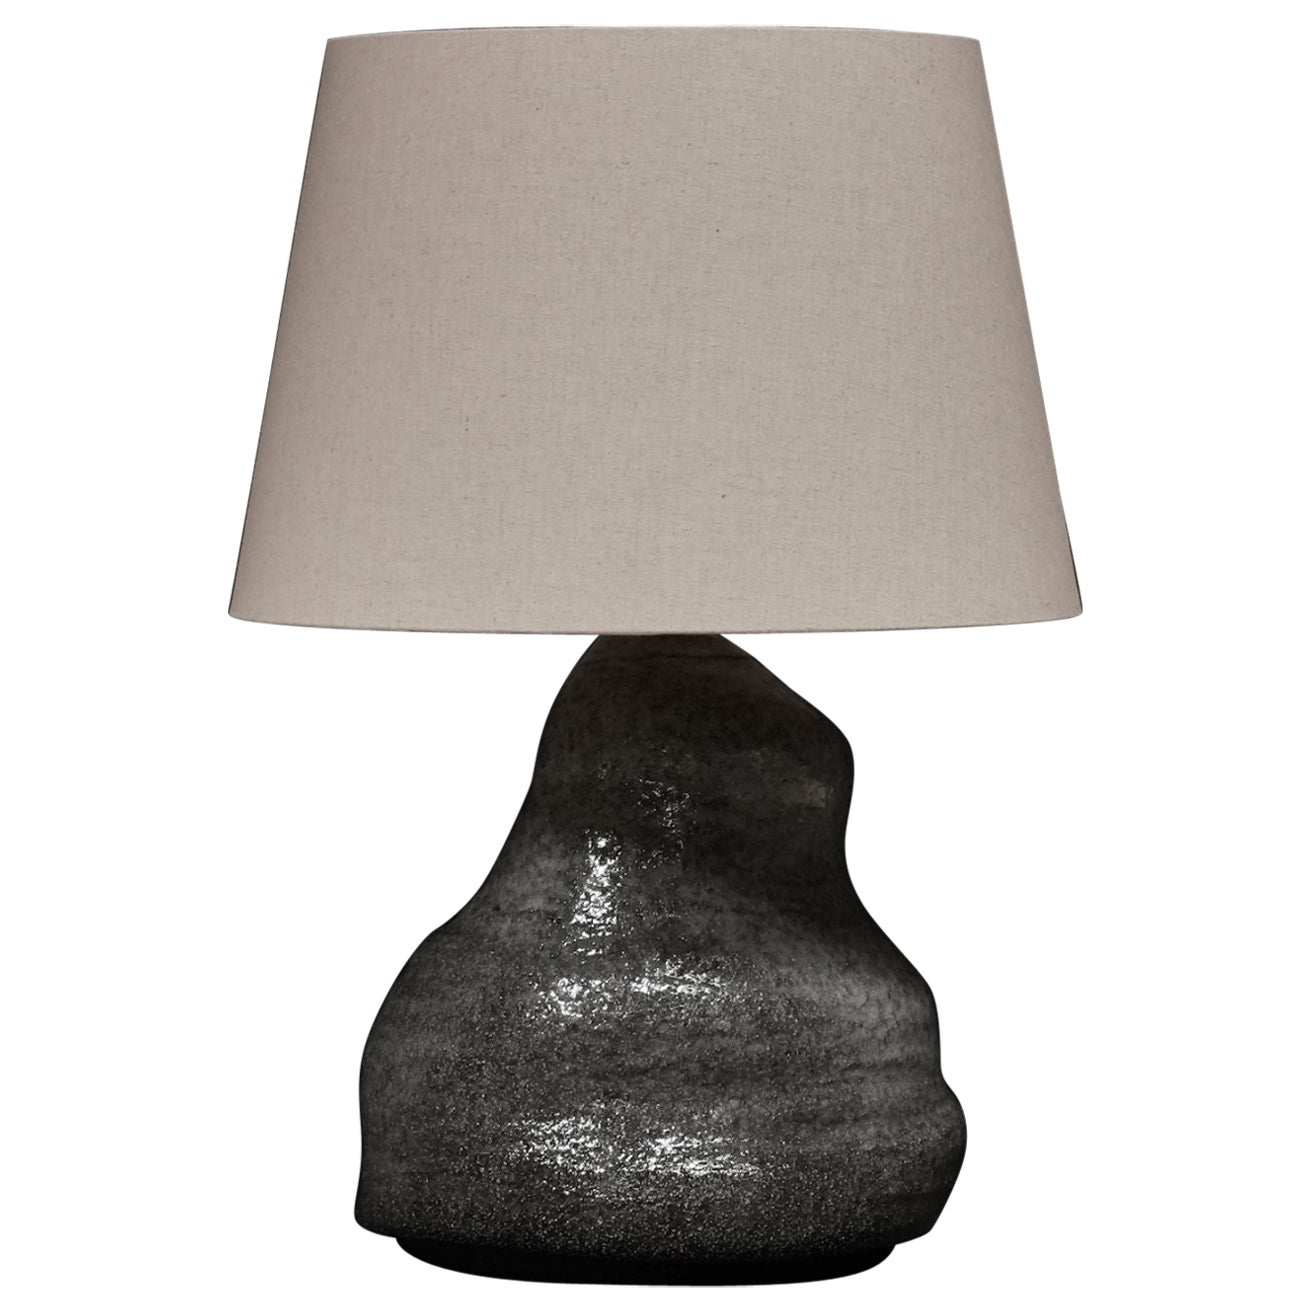 Free Form Ceramic Table Lamp For Sale